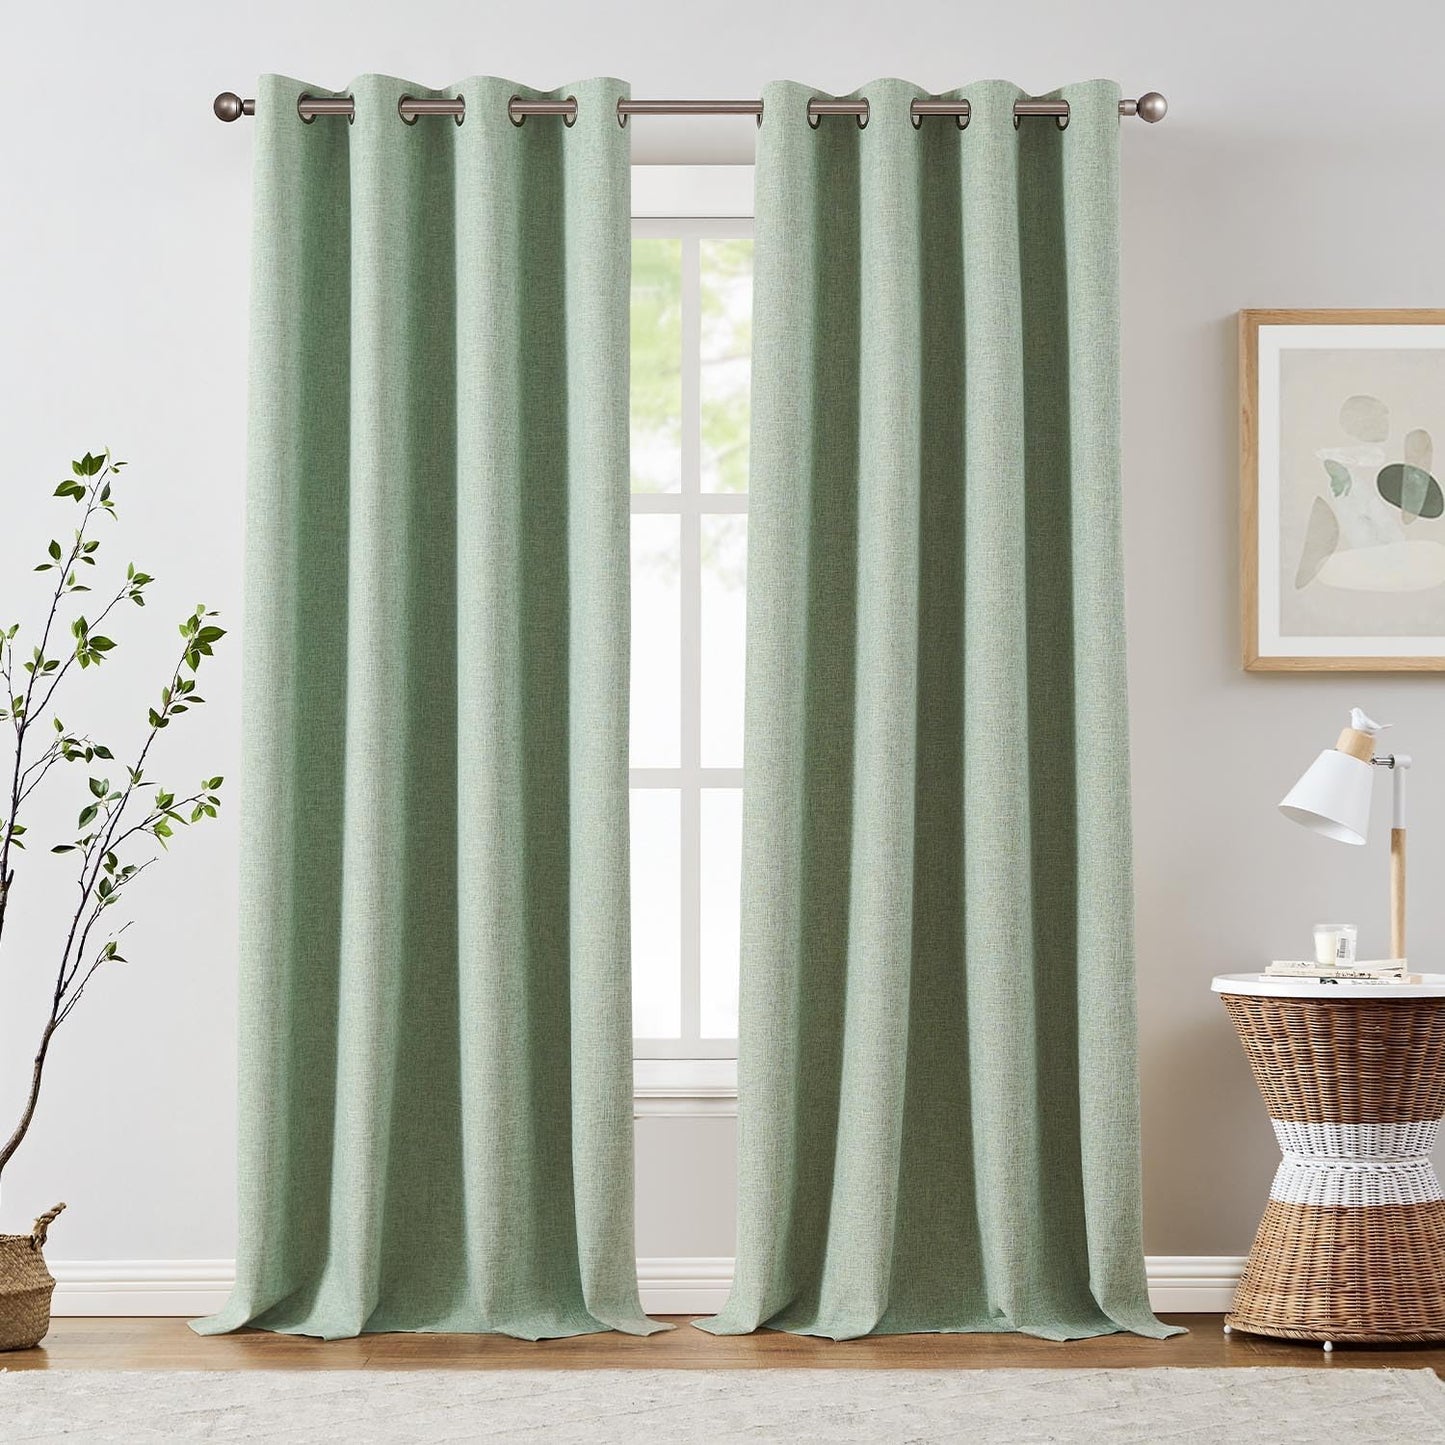 JINCHAN 100% Blackout Curtains for Bedroom, 90 Inch Length Linen Textured Drapes for Living Room, Thermal Insulated Full Light Blocking Curtains, Grommet Top Window Treatments 2 Panels Heathered White  CKNY HOME FASHION Textured | Sage Green W50 X L108 